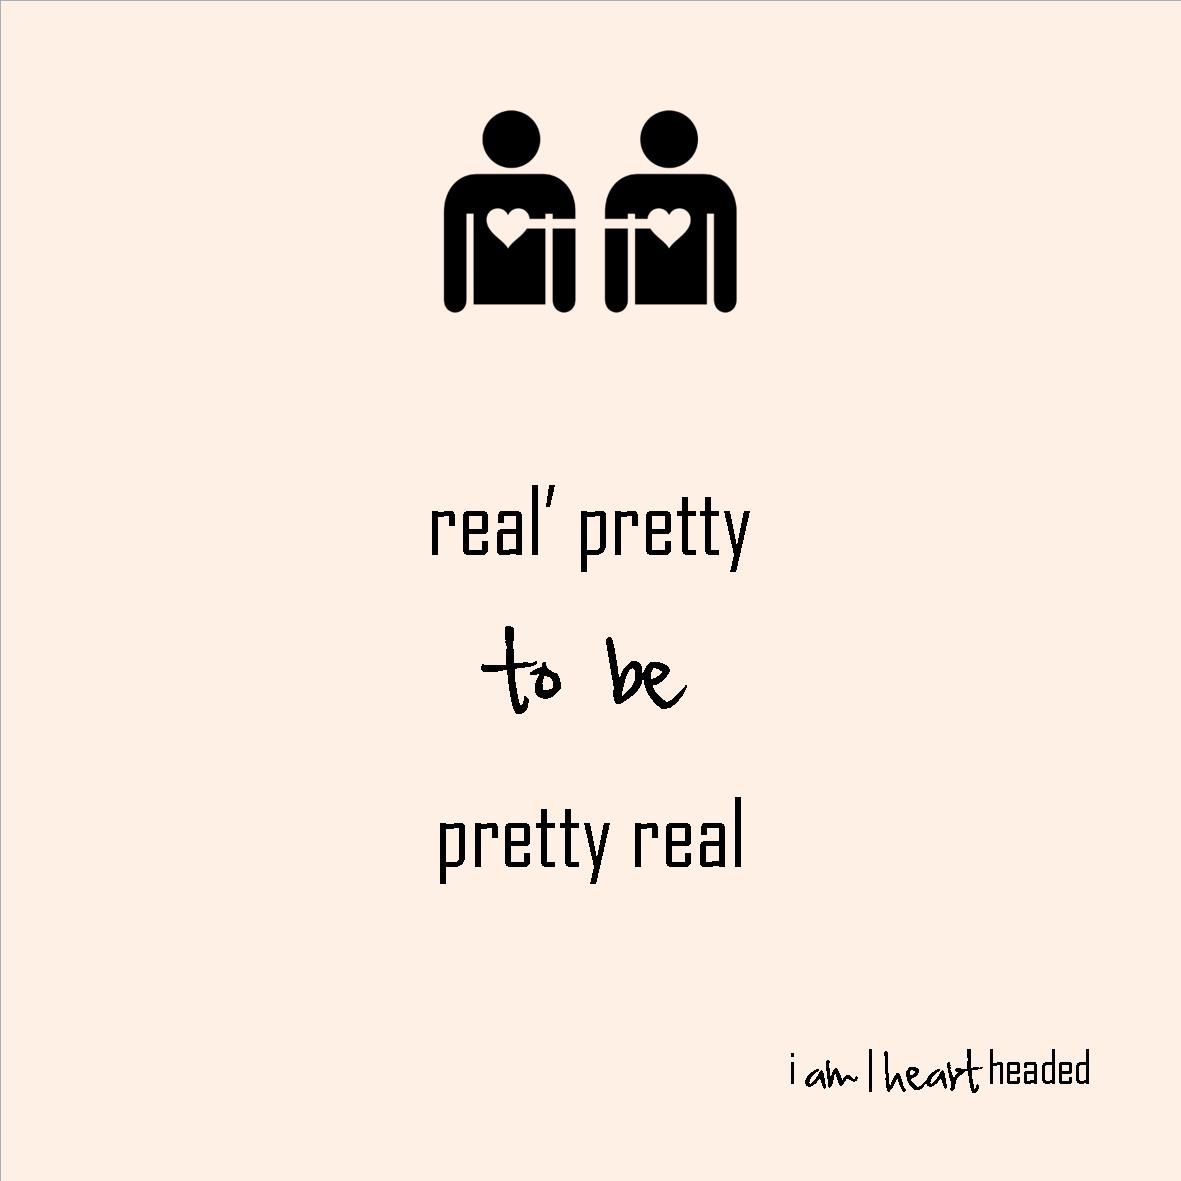 full-size featured image of quote 'pretty real' in category 'sparkly' at i am | heart headed